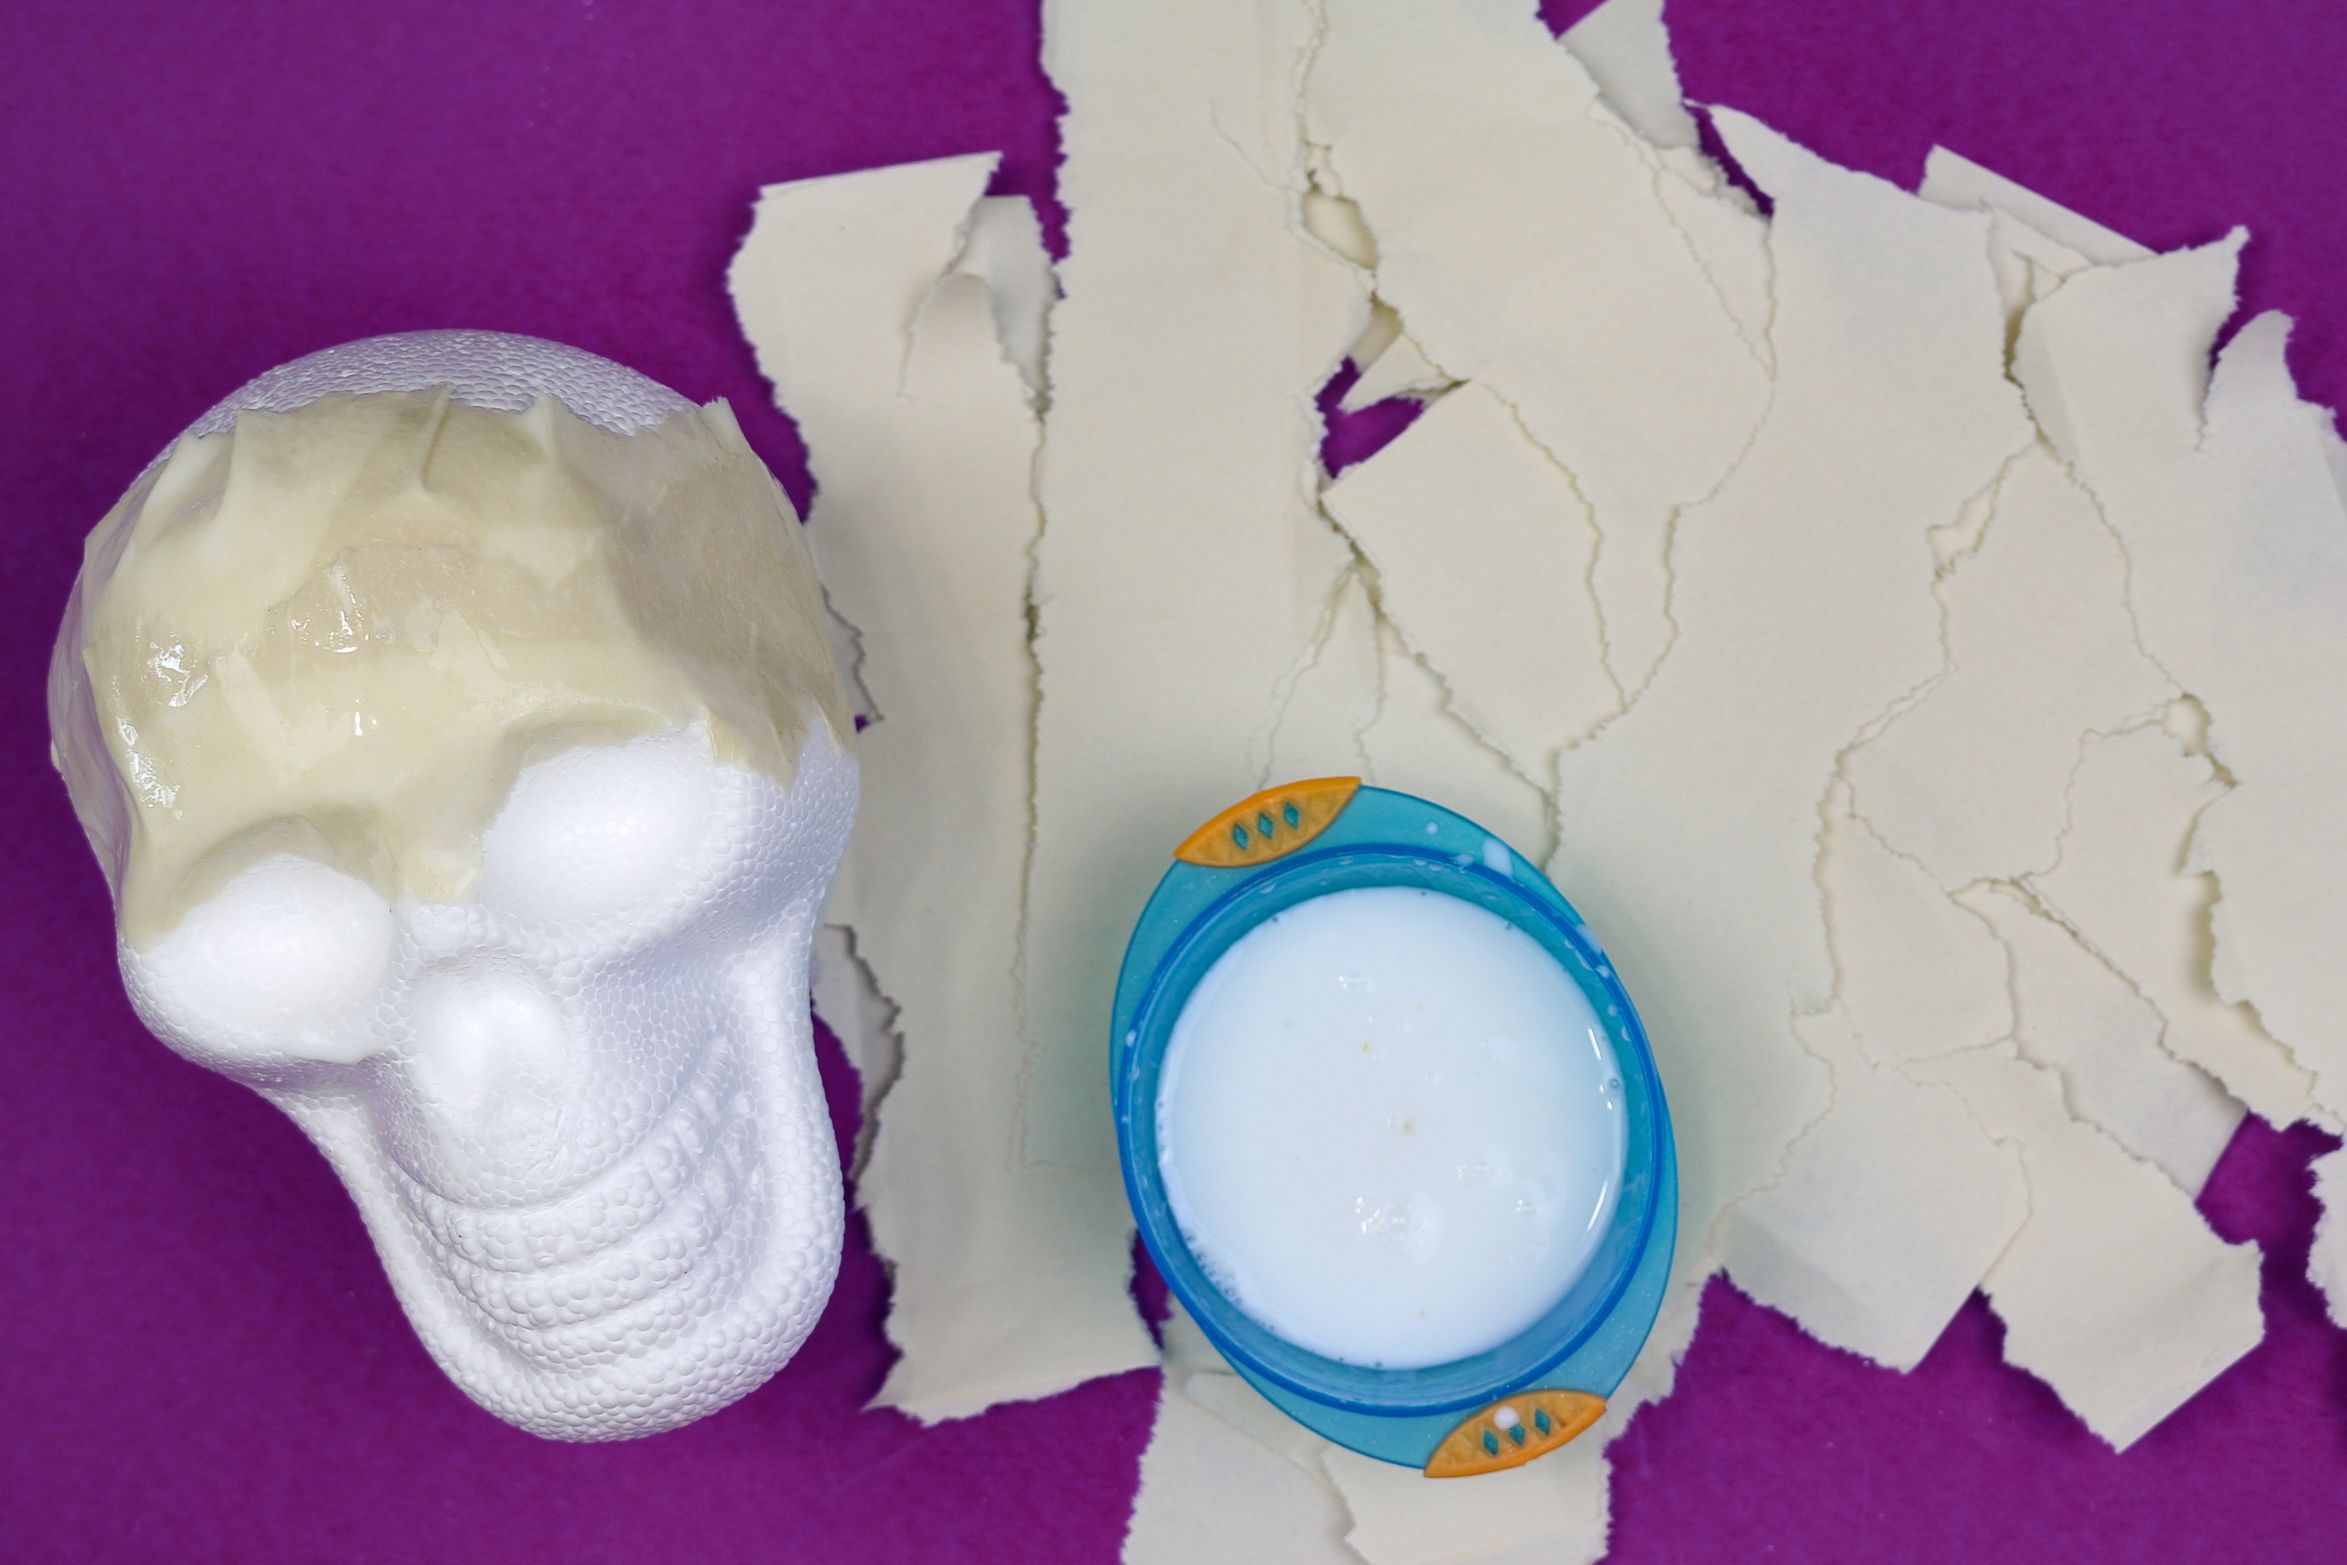 foam skull partially covered with paper mache, ripped construction paper, and white glue on a purple background